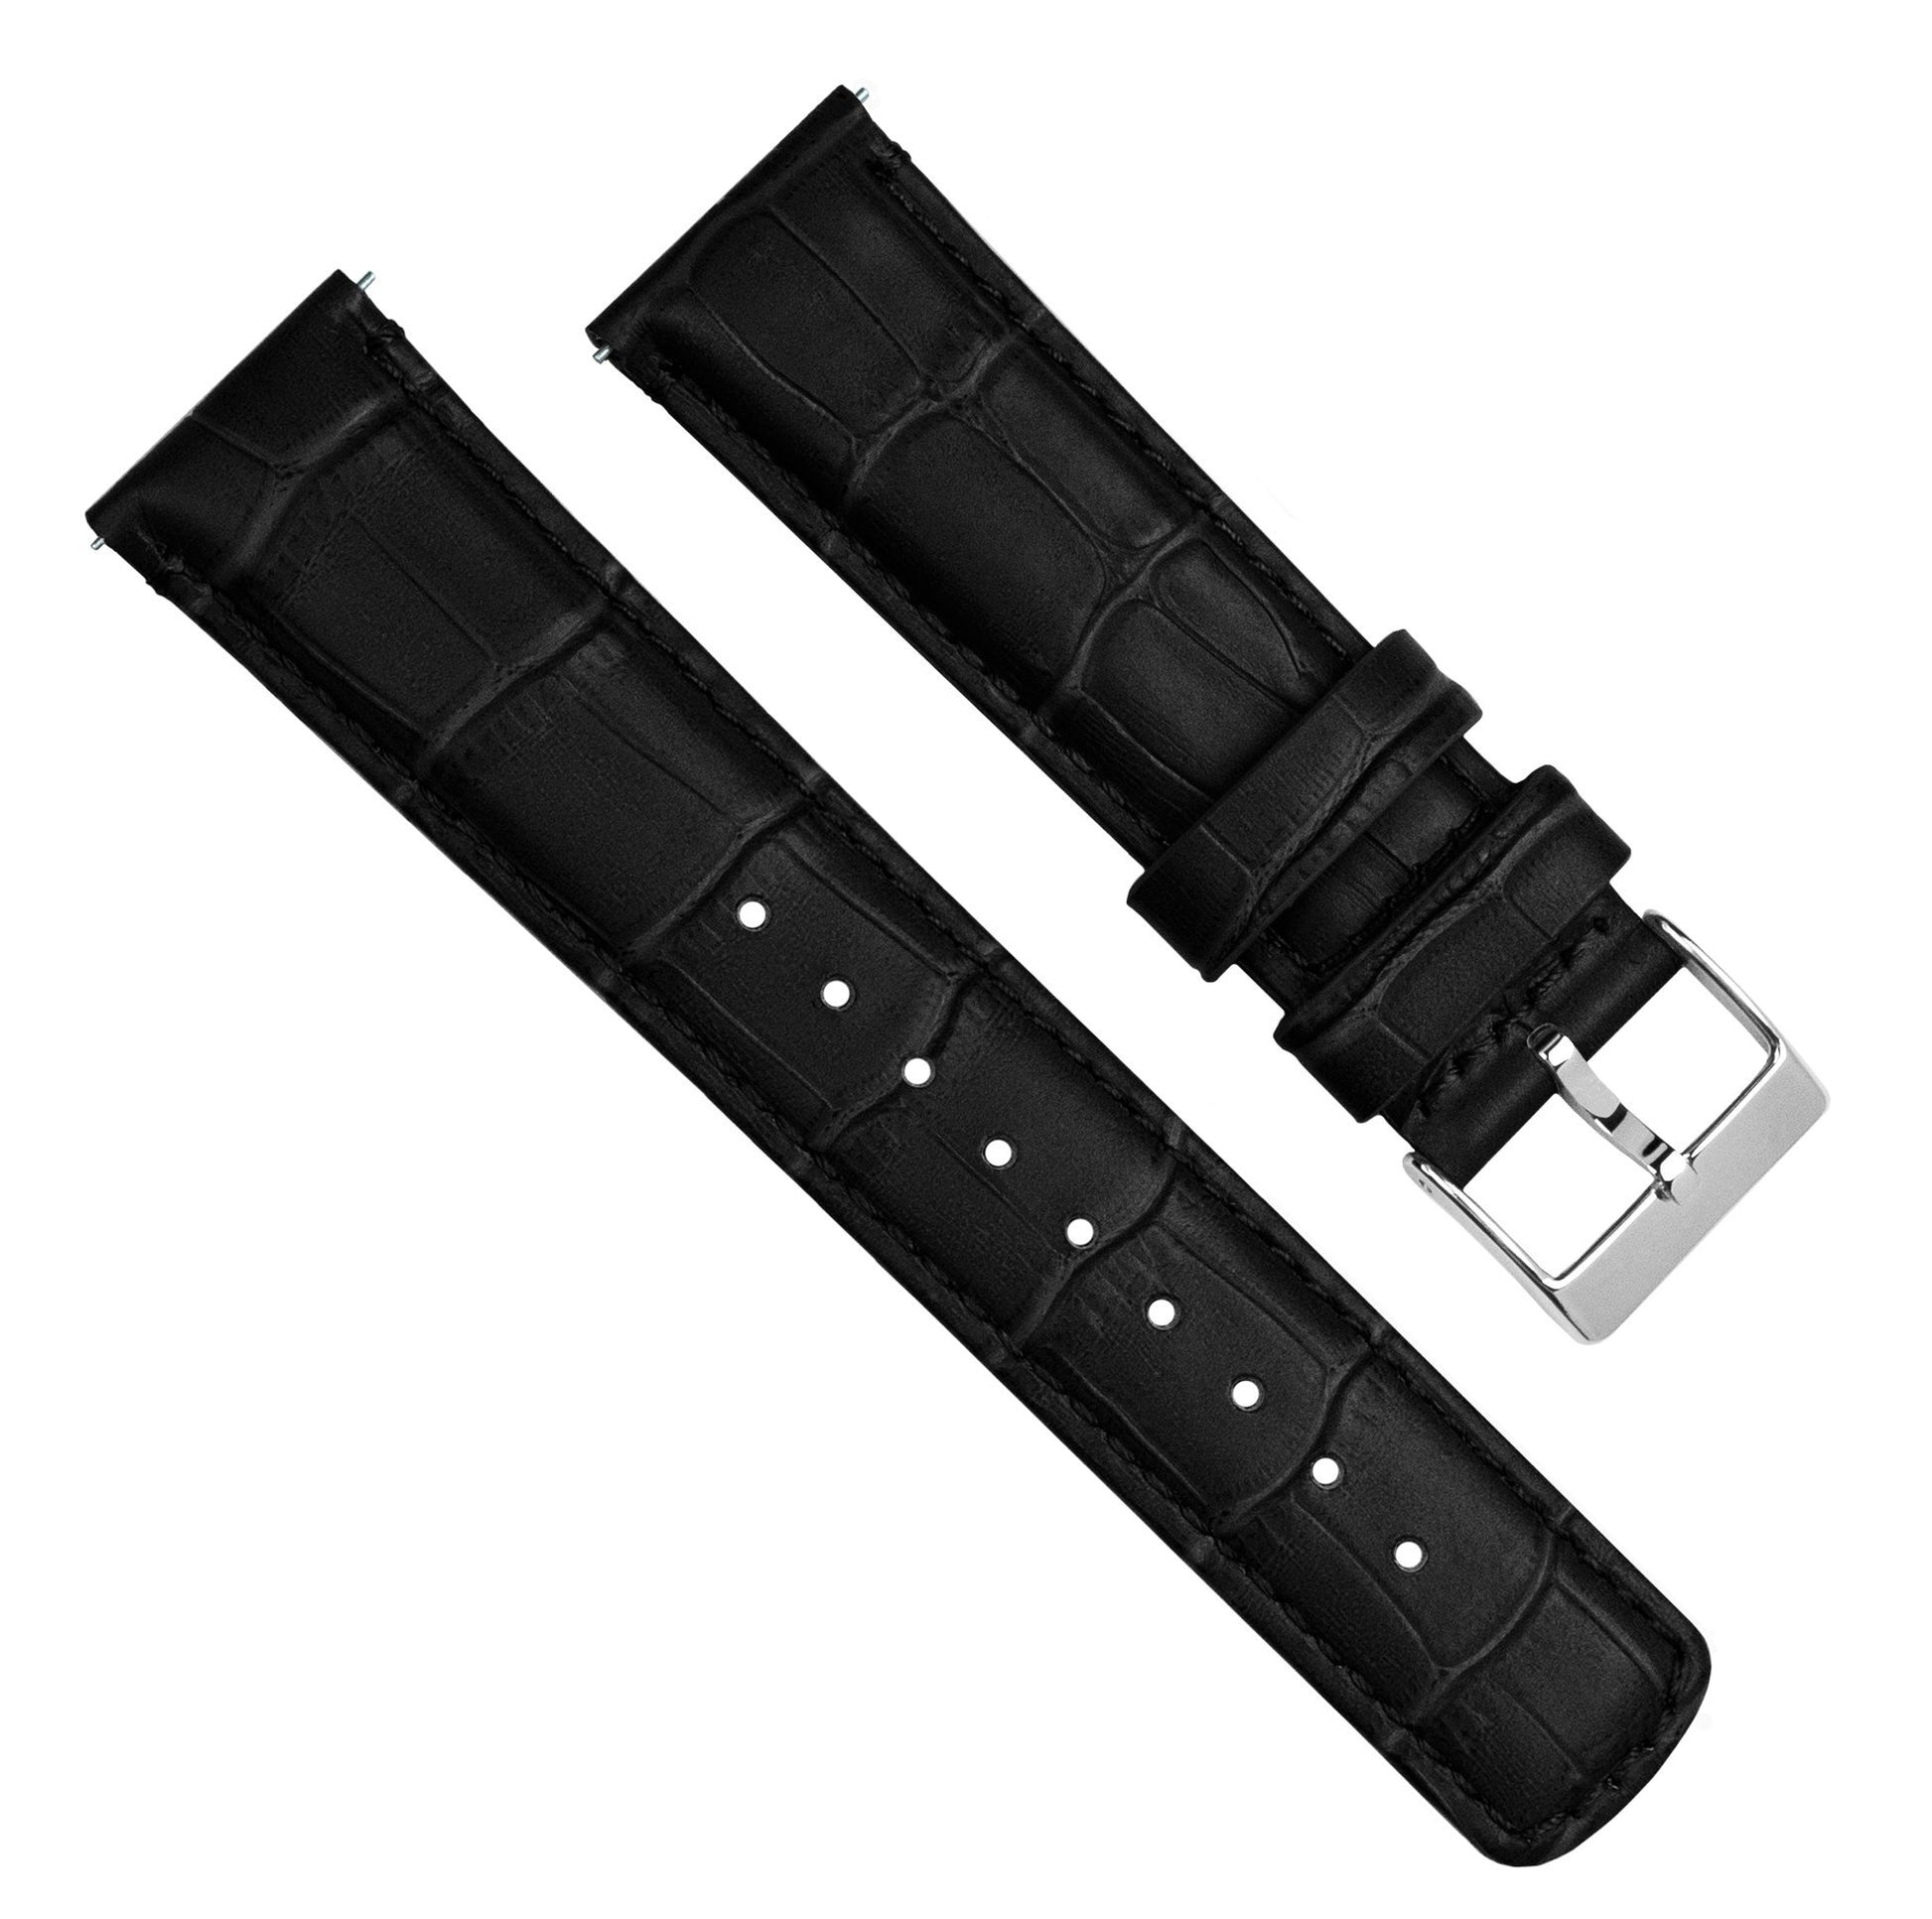 Withings Nokia Activité and Steel HR | Black Alligator Grain Leather - Barton Watch Bands